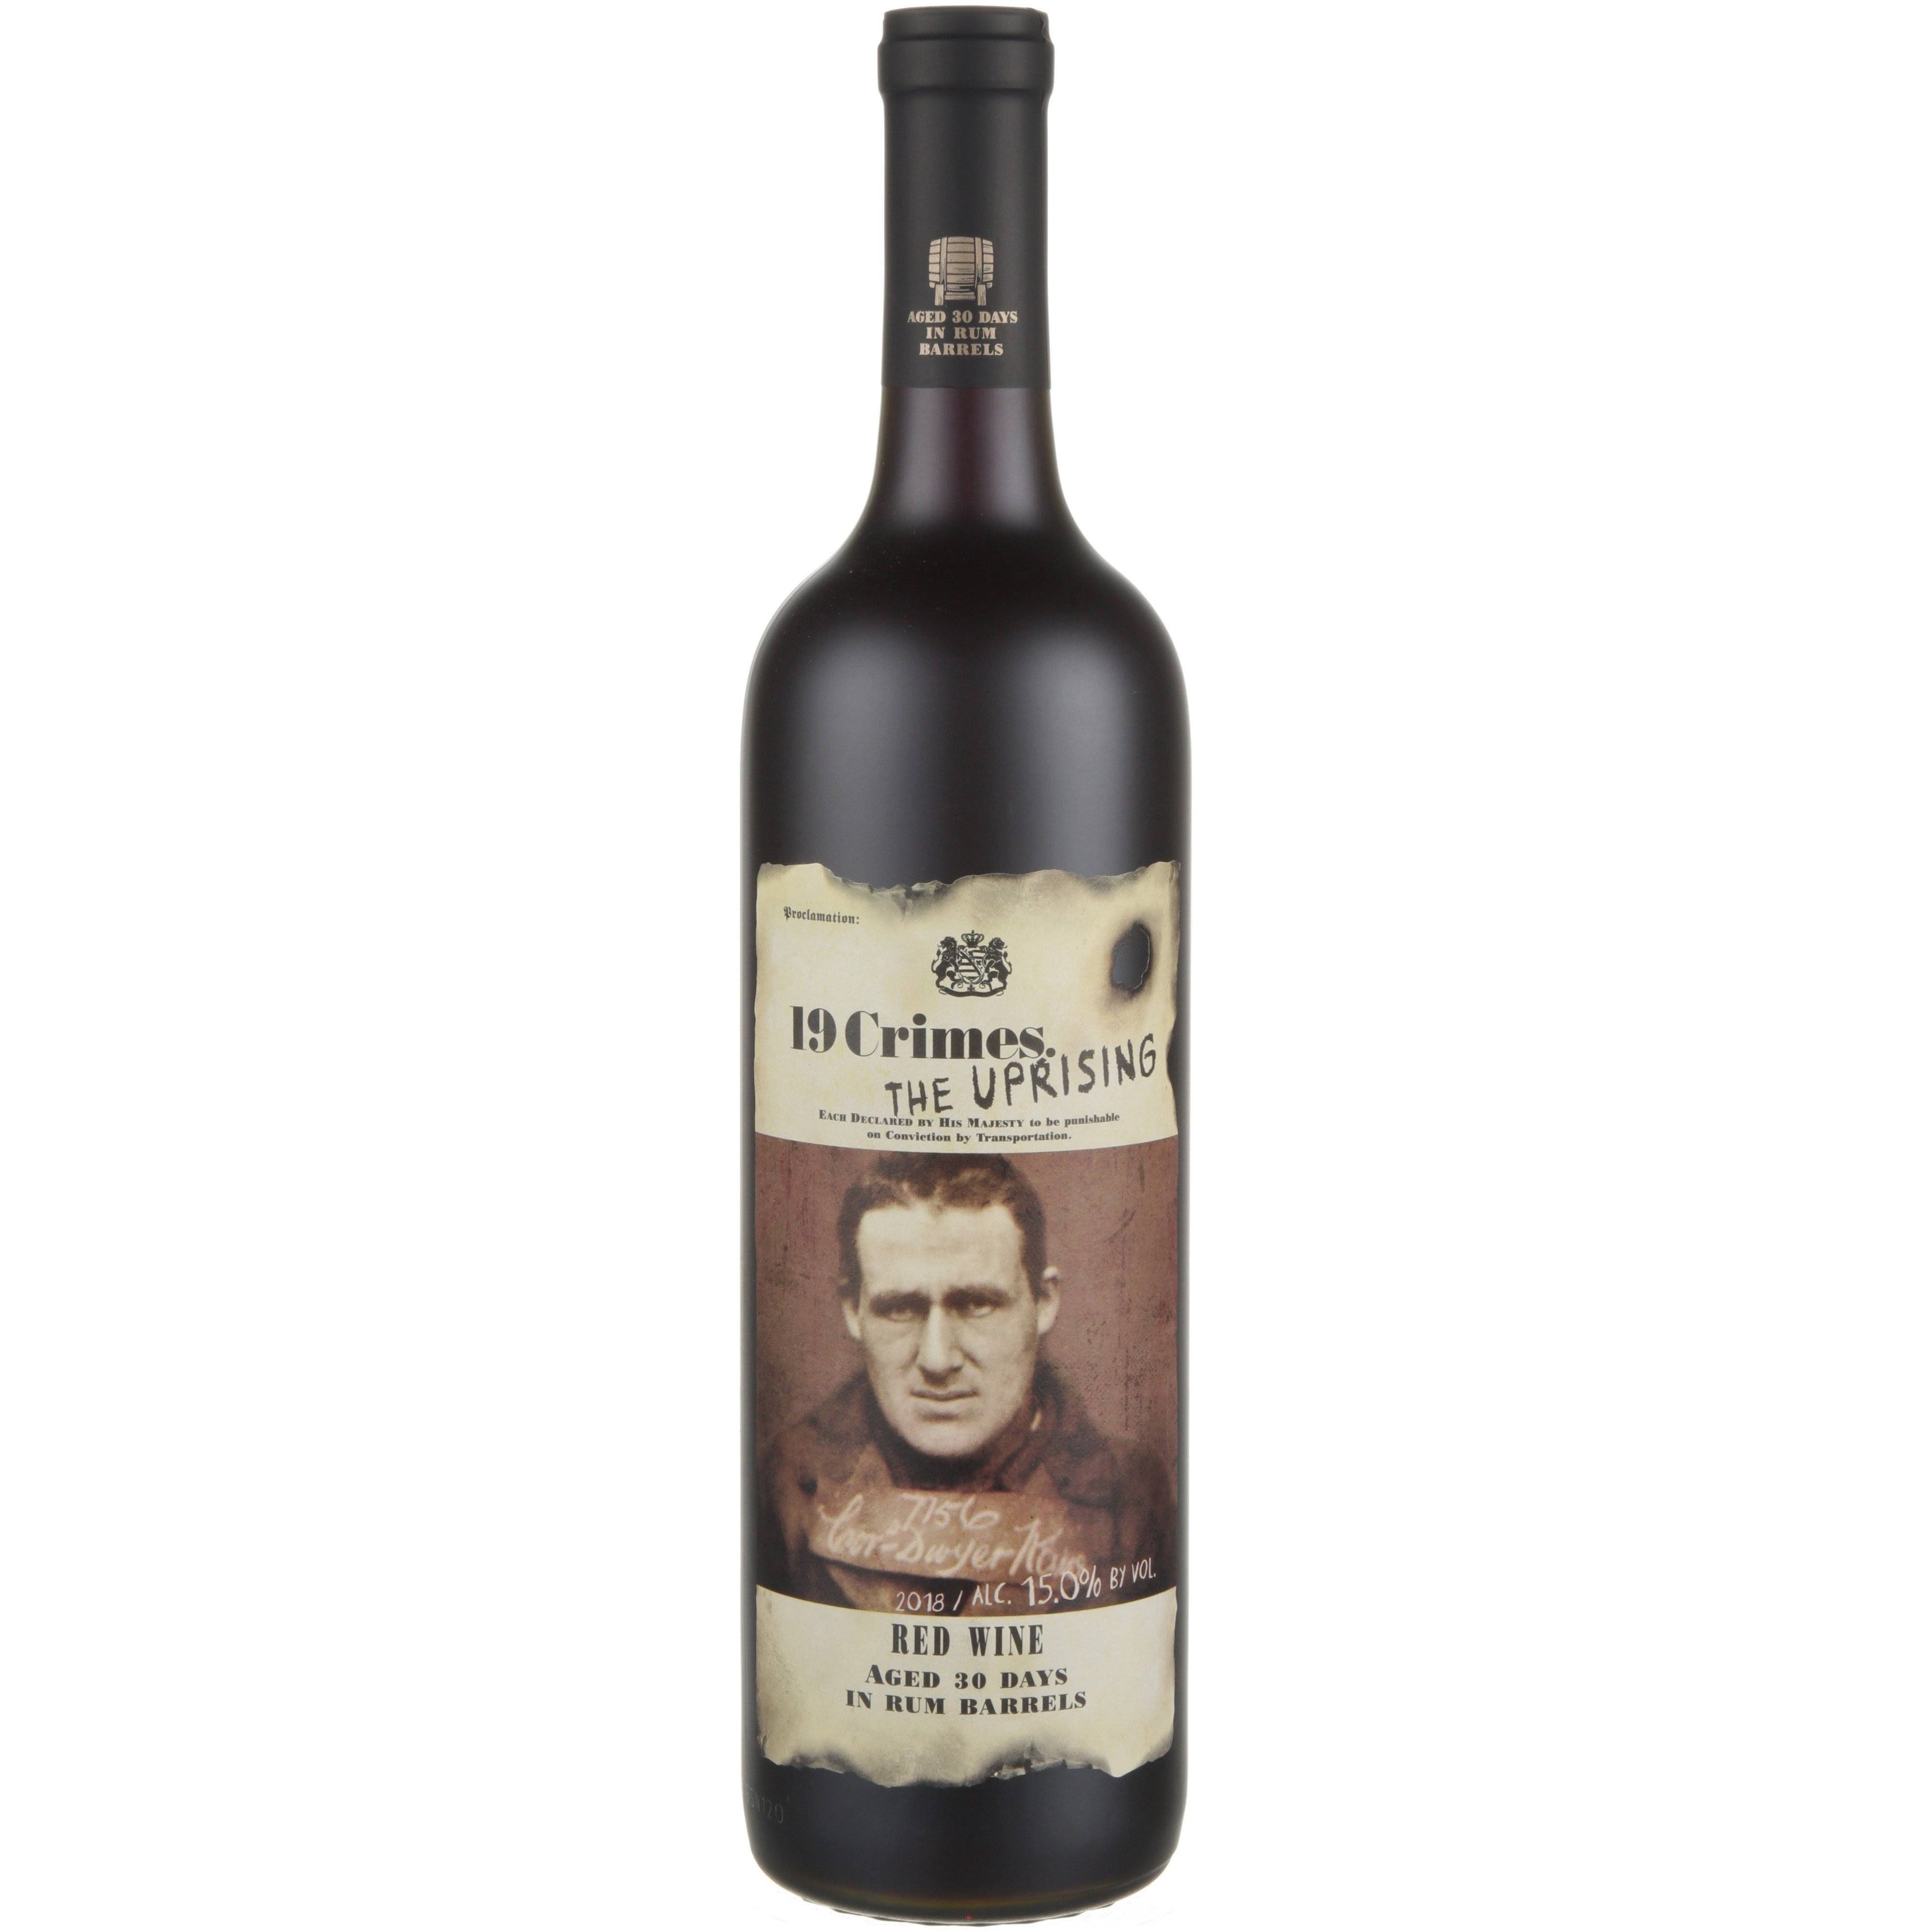 19 Crimes Red Wine, The Uprising - 750 ml